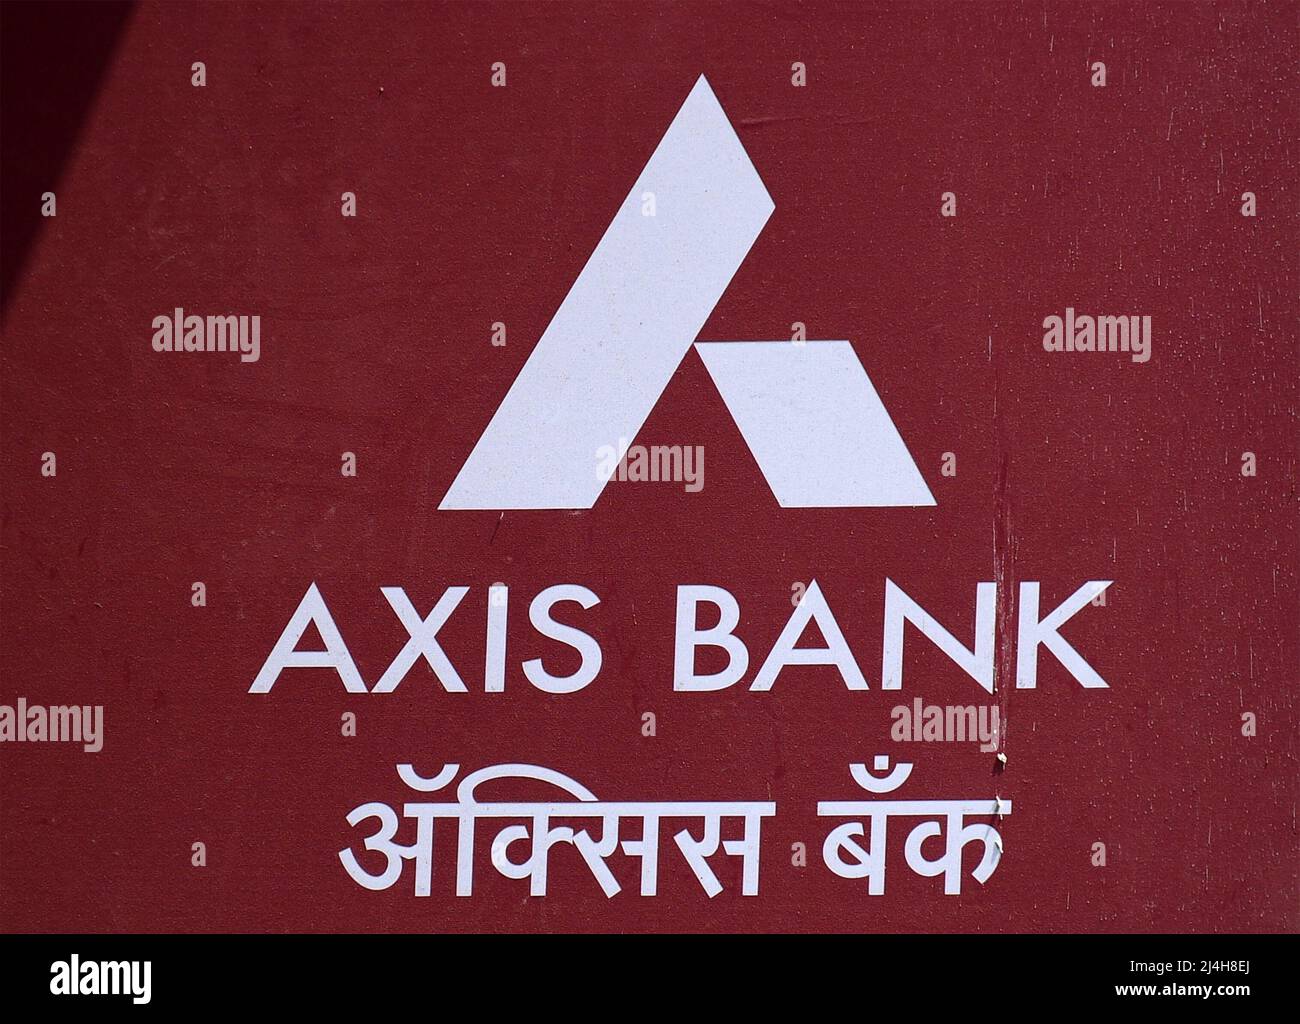 Axis bank logo seen at its branch in Mumbai. Axis bank is one of the largest private sector bank in India with its headquarters Mumbai, Maharashtra. (Photo by Ashish Vaishnav / SOPA Images/Sipa USA) Stock Photo